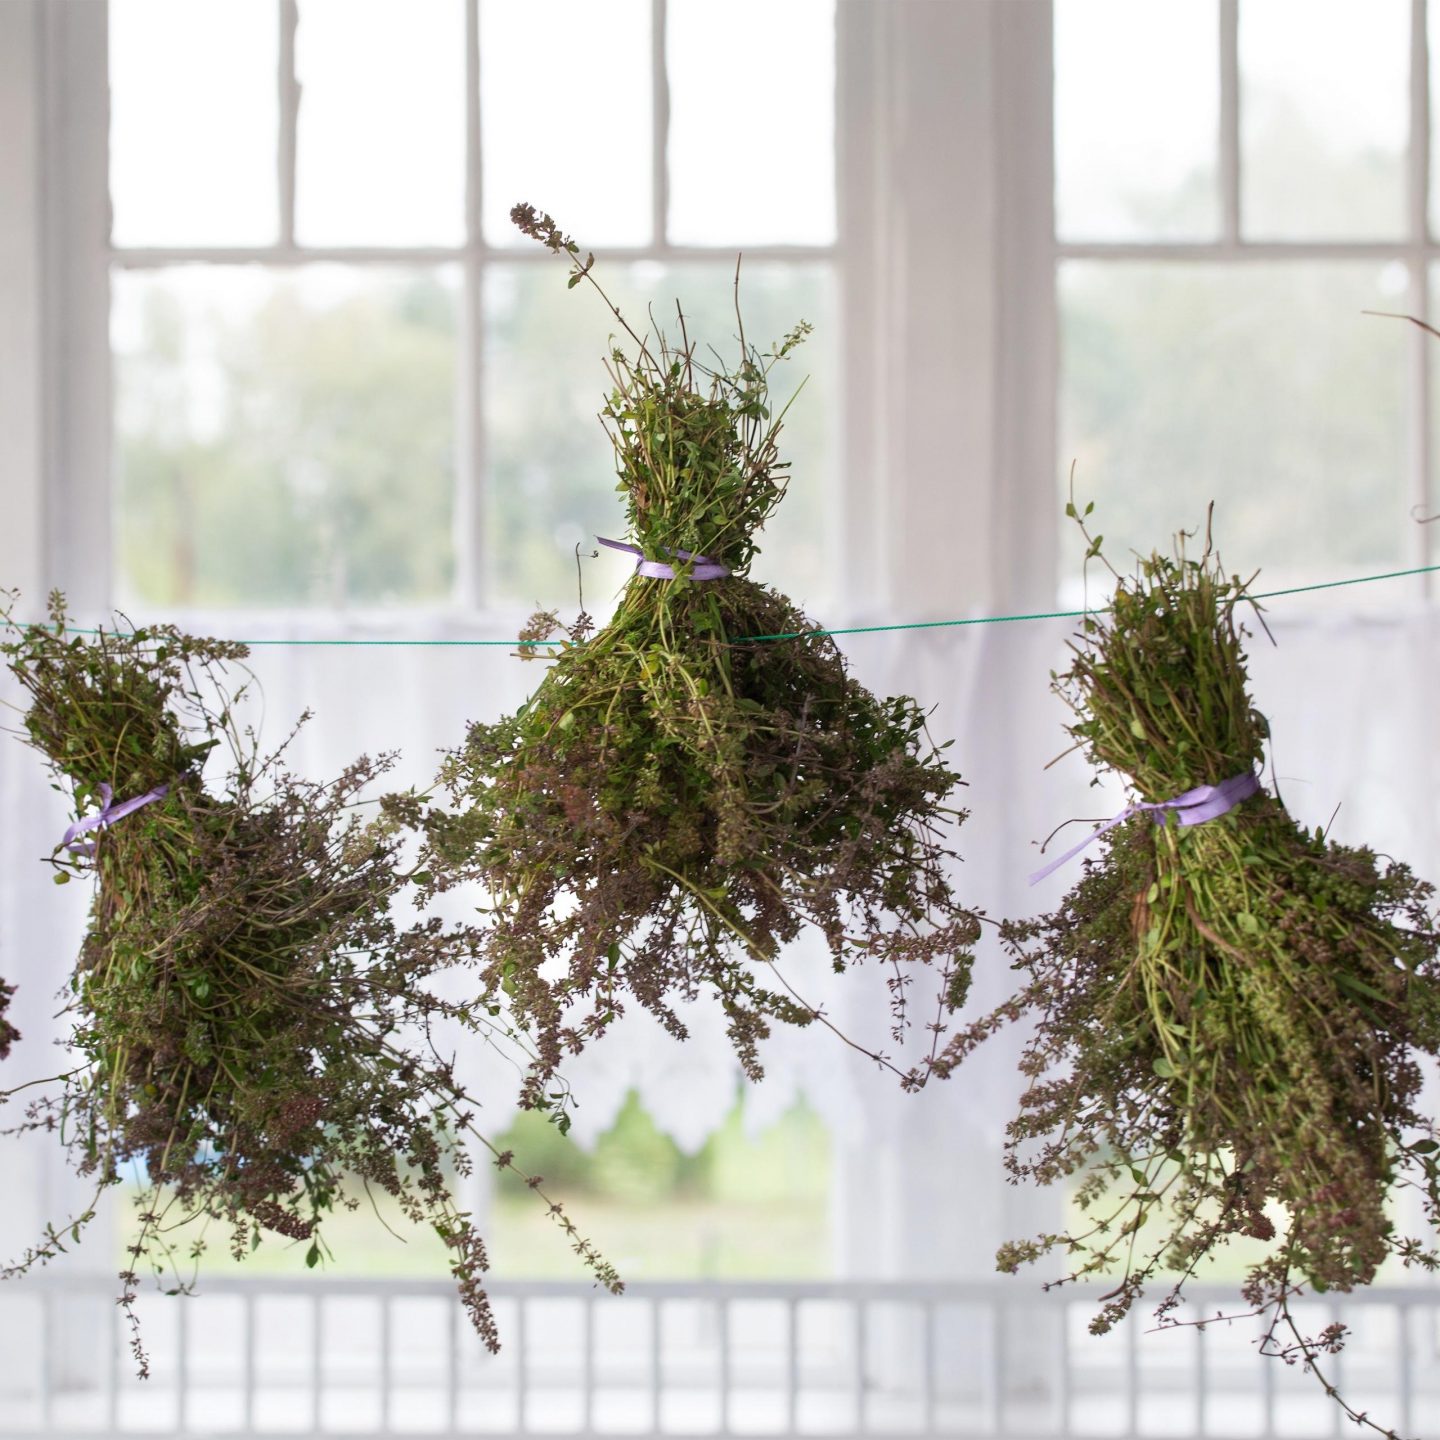 How to dry and store fresh garden herbs: rosemary, thyme, and more